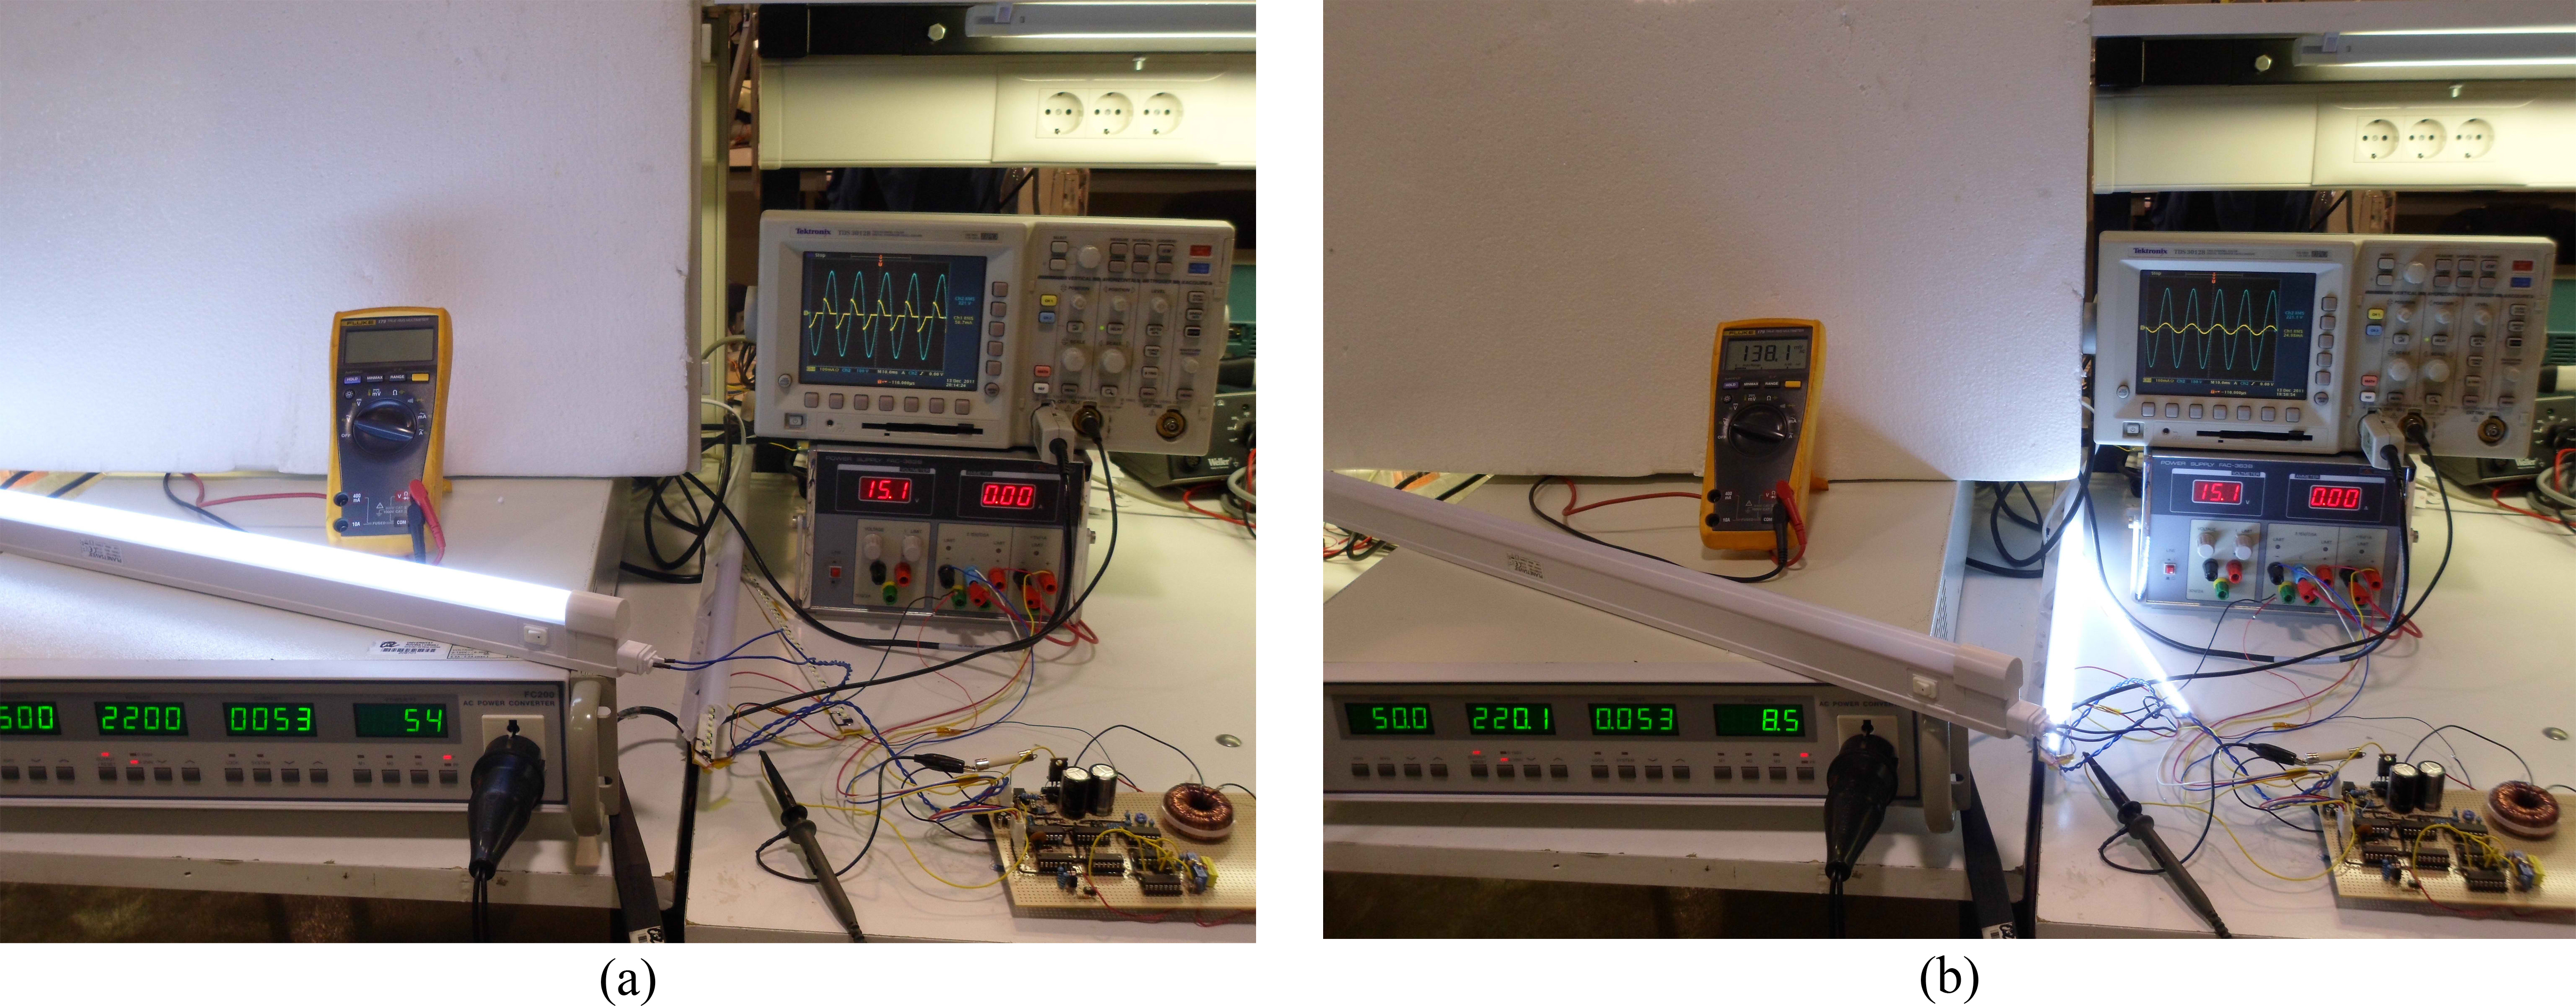 Experimental development for tubular LED lamp (a) without PFC and (b) with PFC.